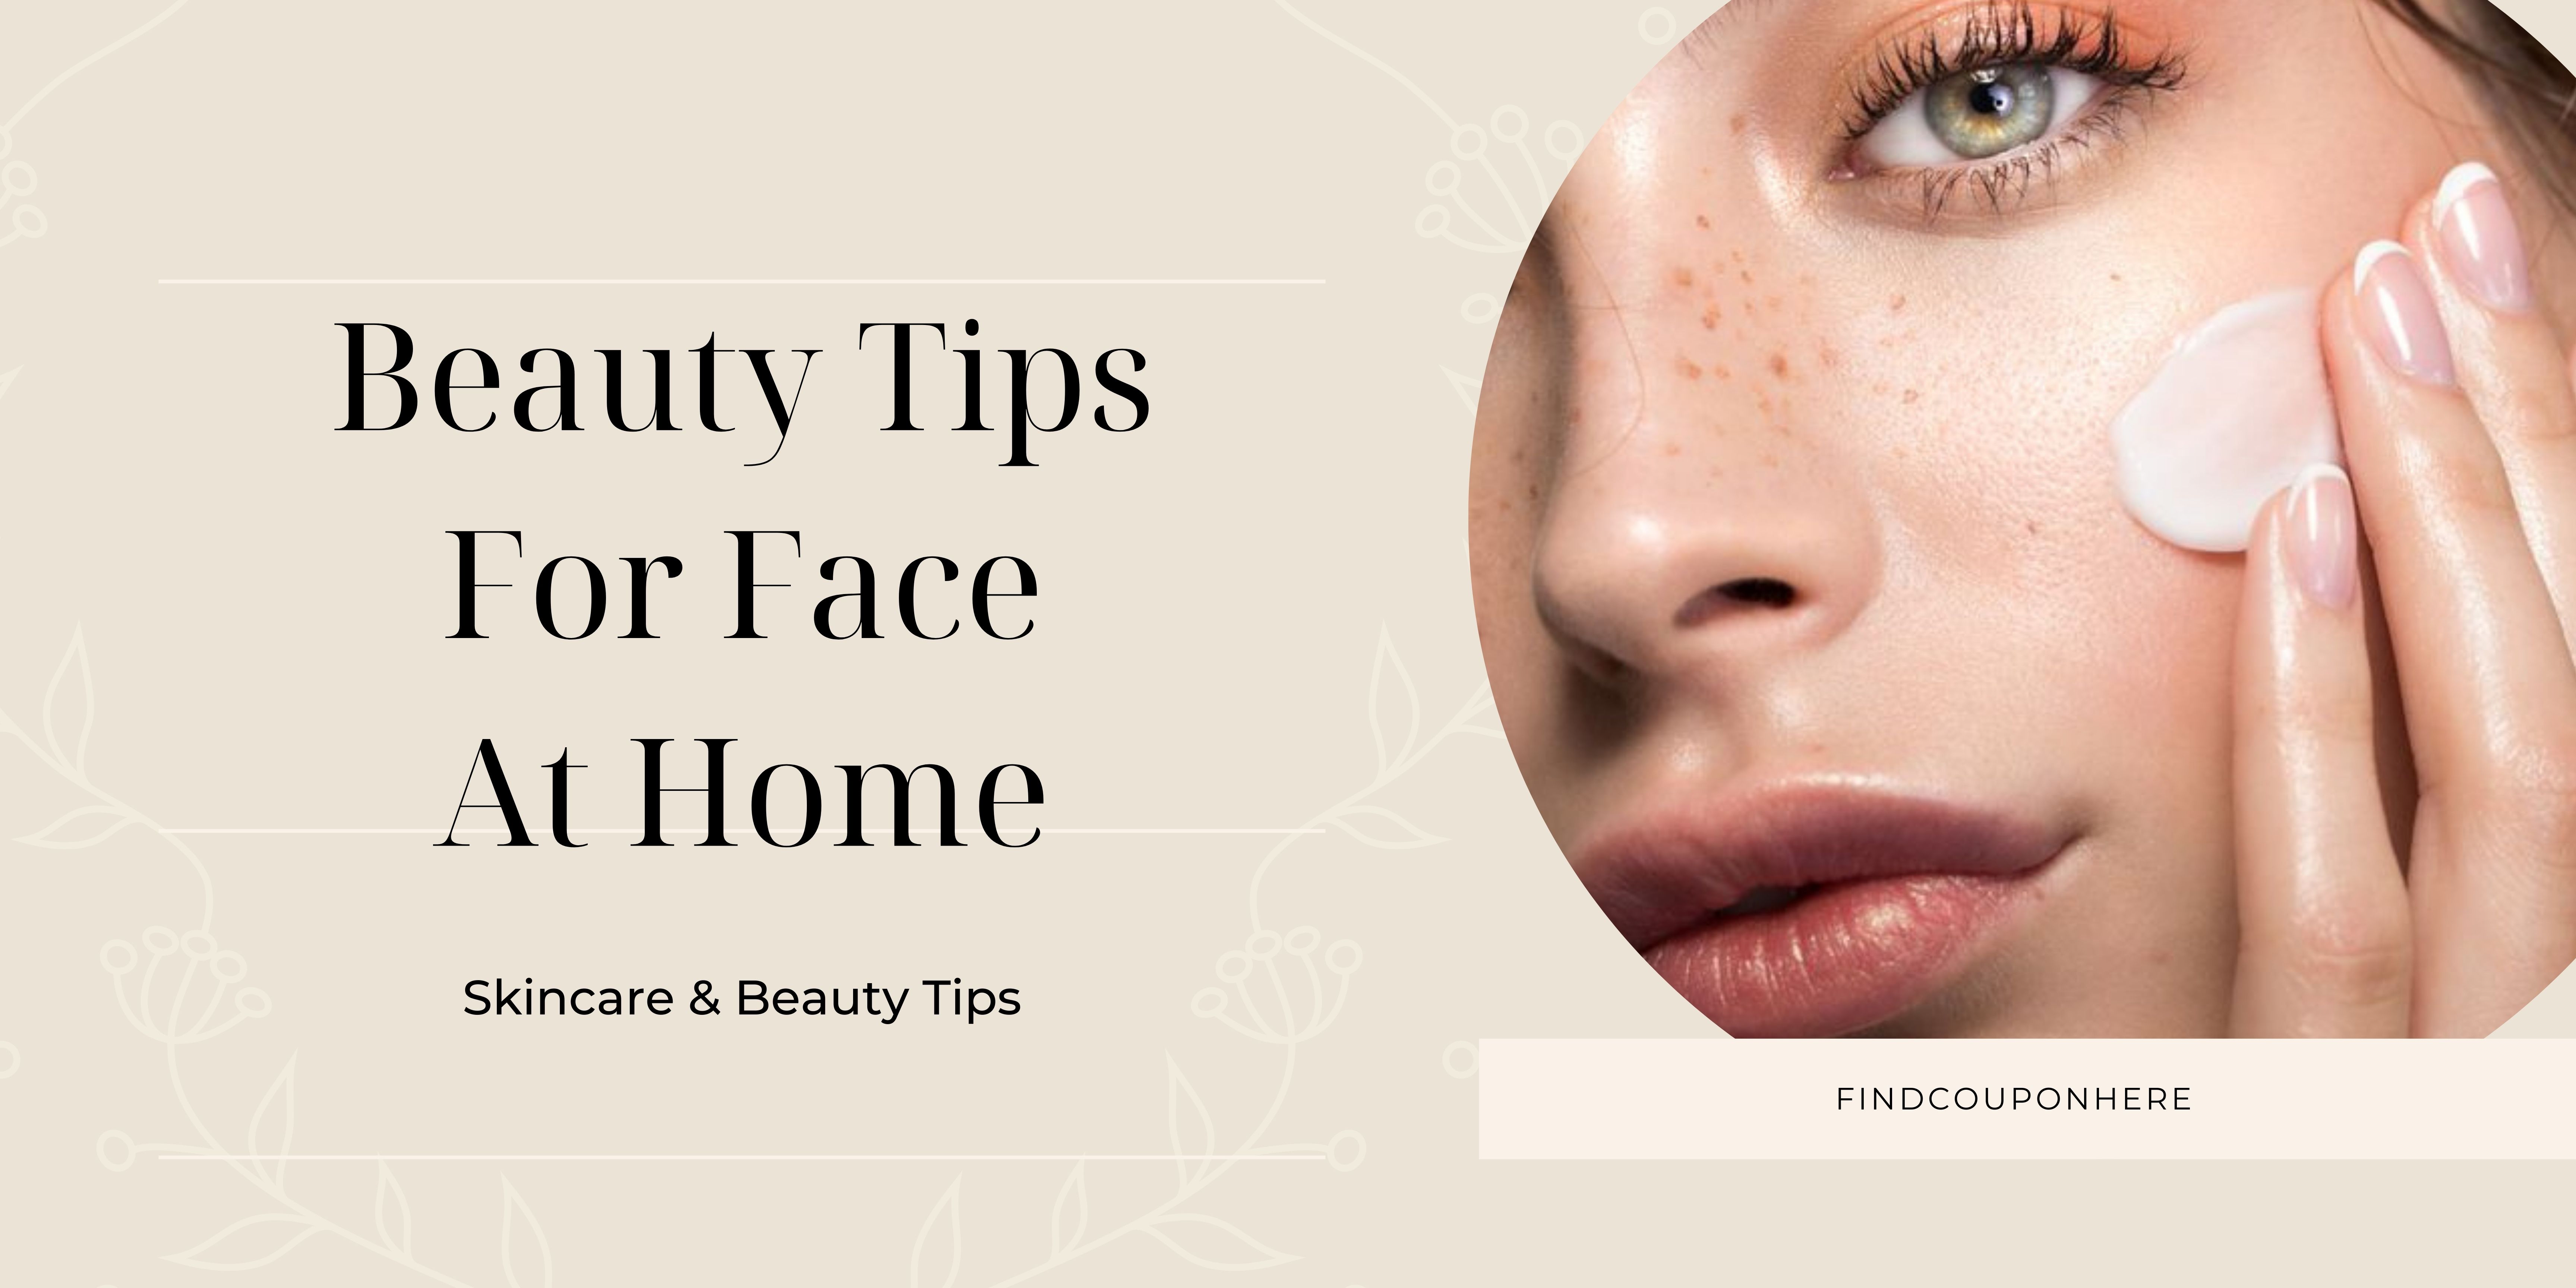 Practical Beauty Tips For Face & SkinCare At Home - Step By Step Guide